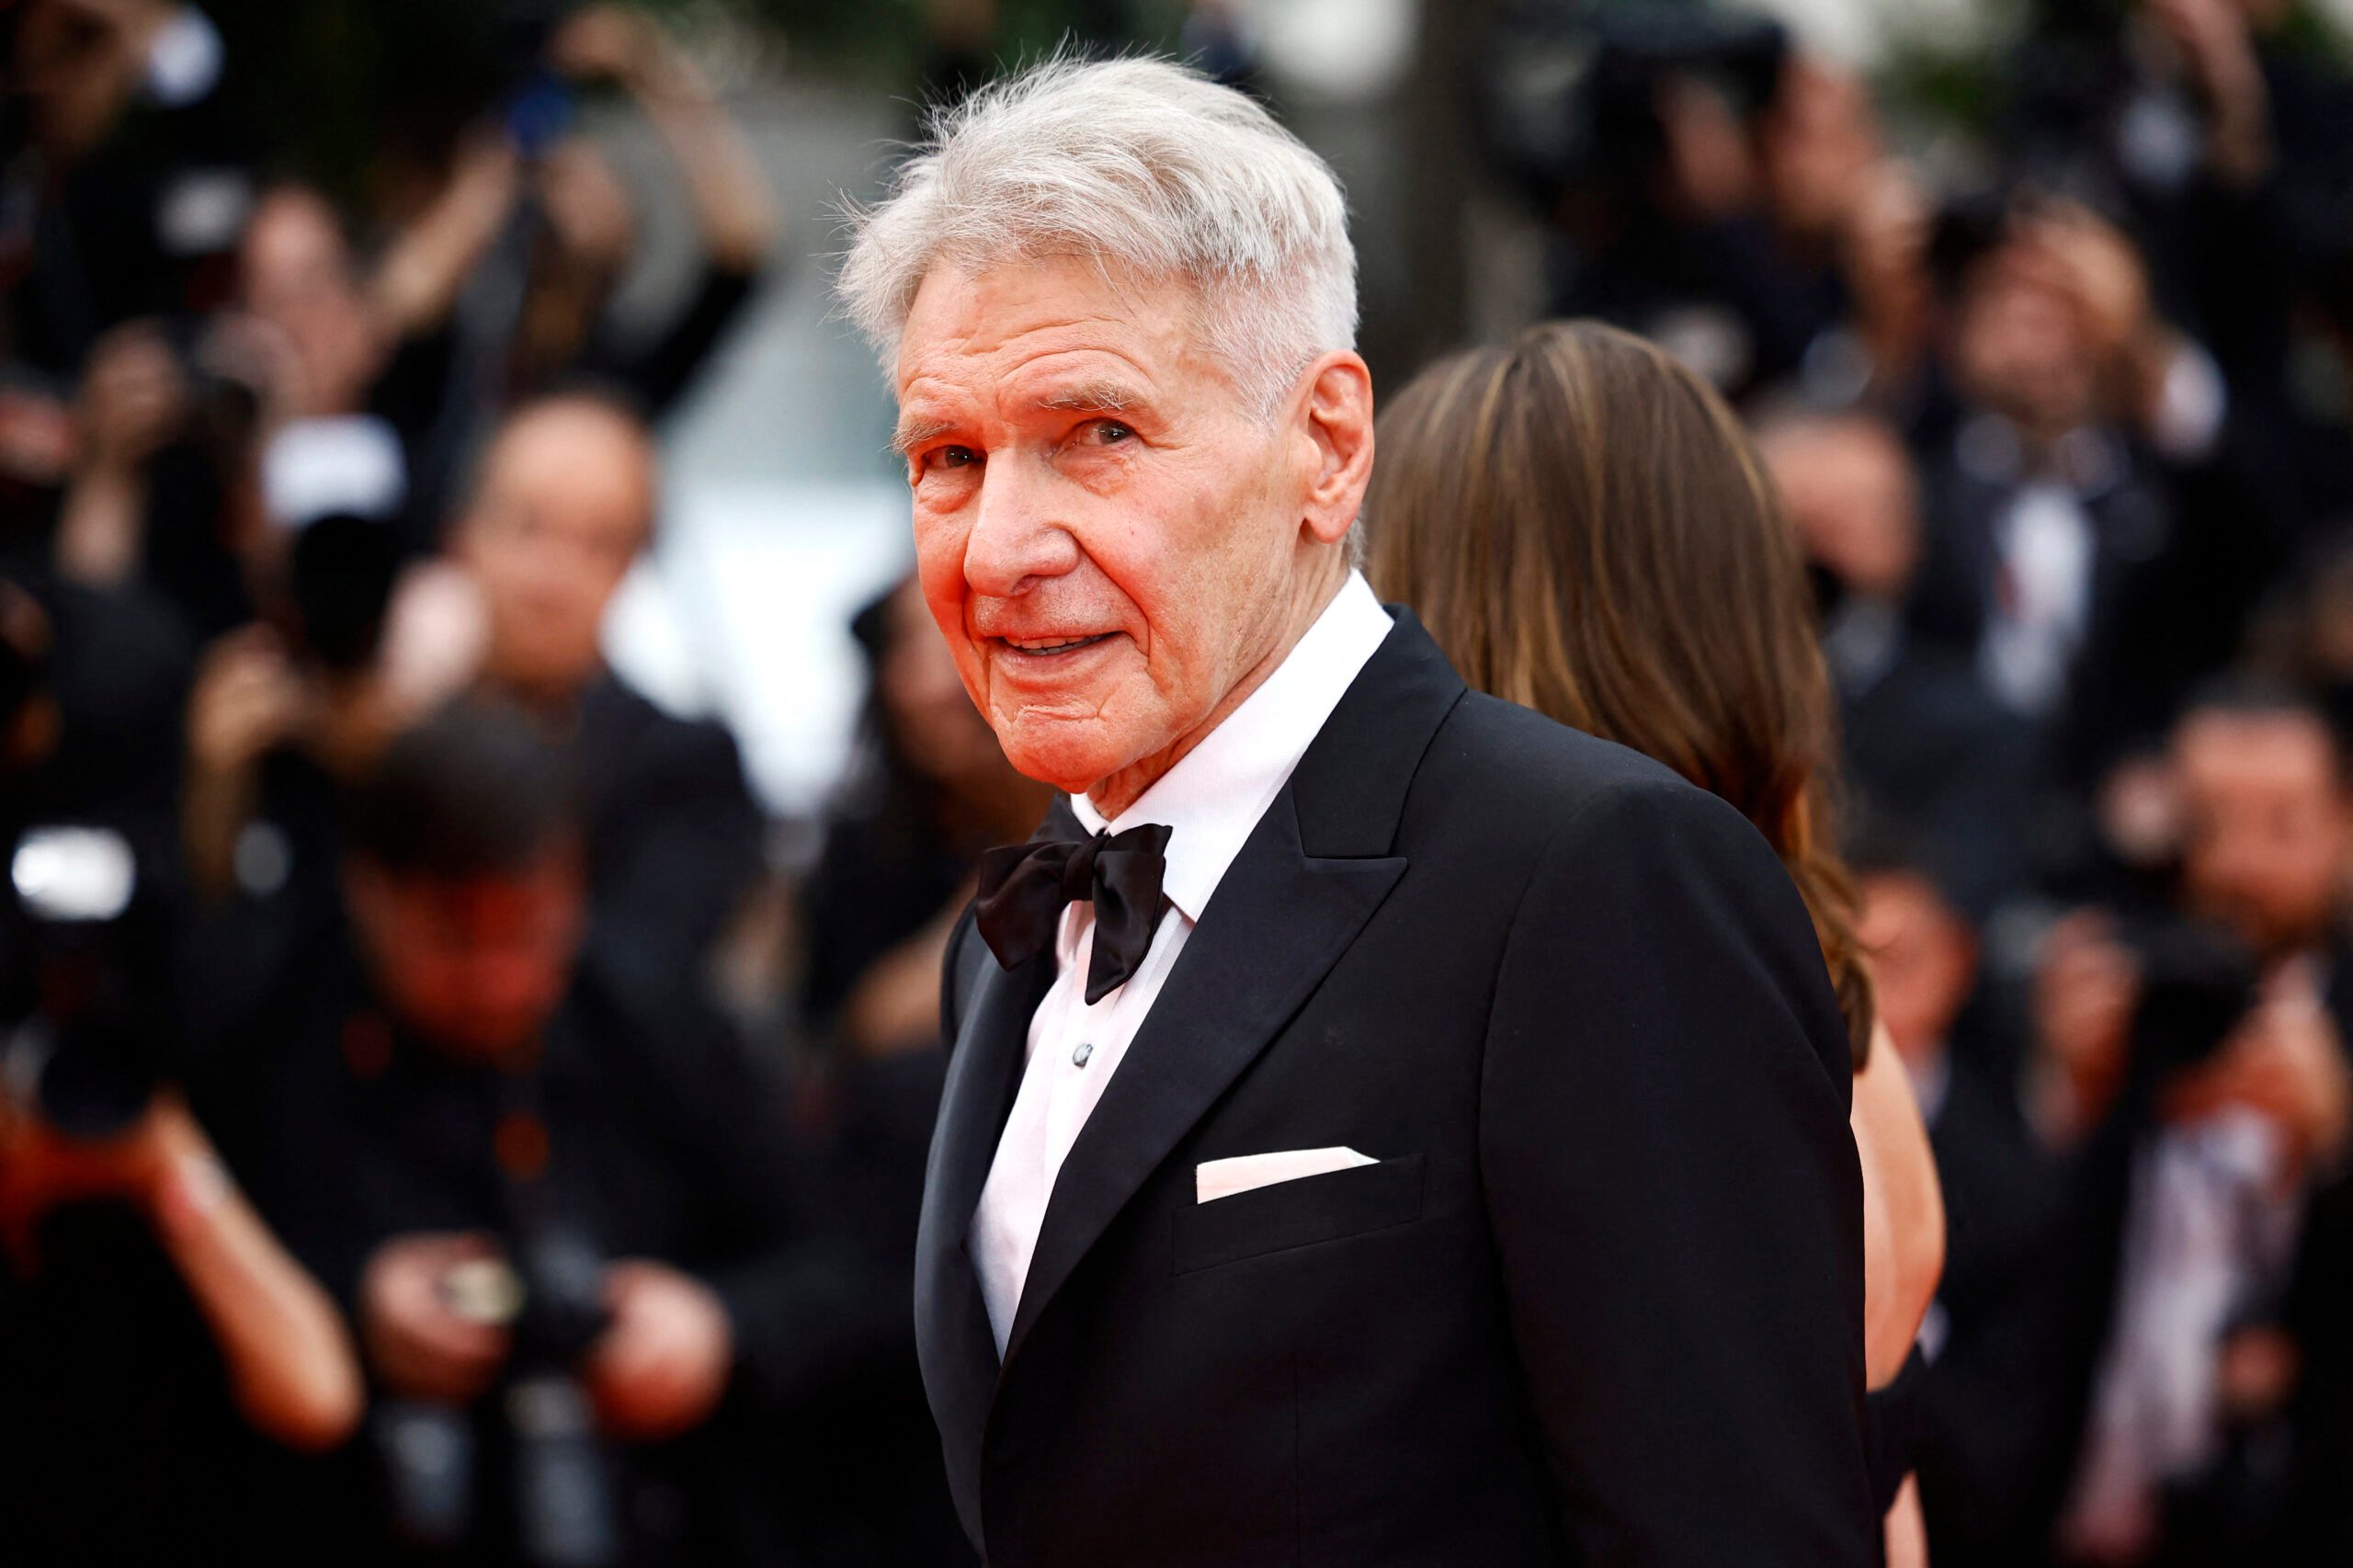 Indiana Jones 5 to Premiere at Cannes 2023